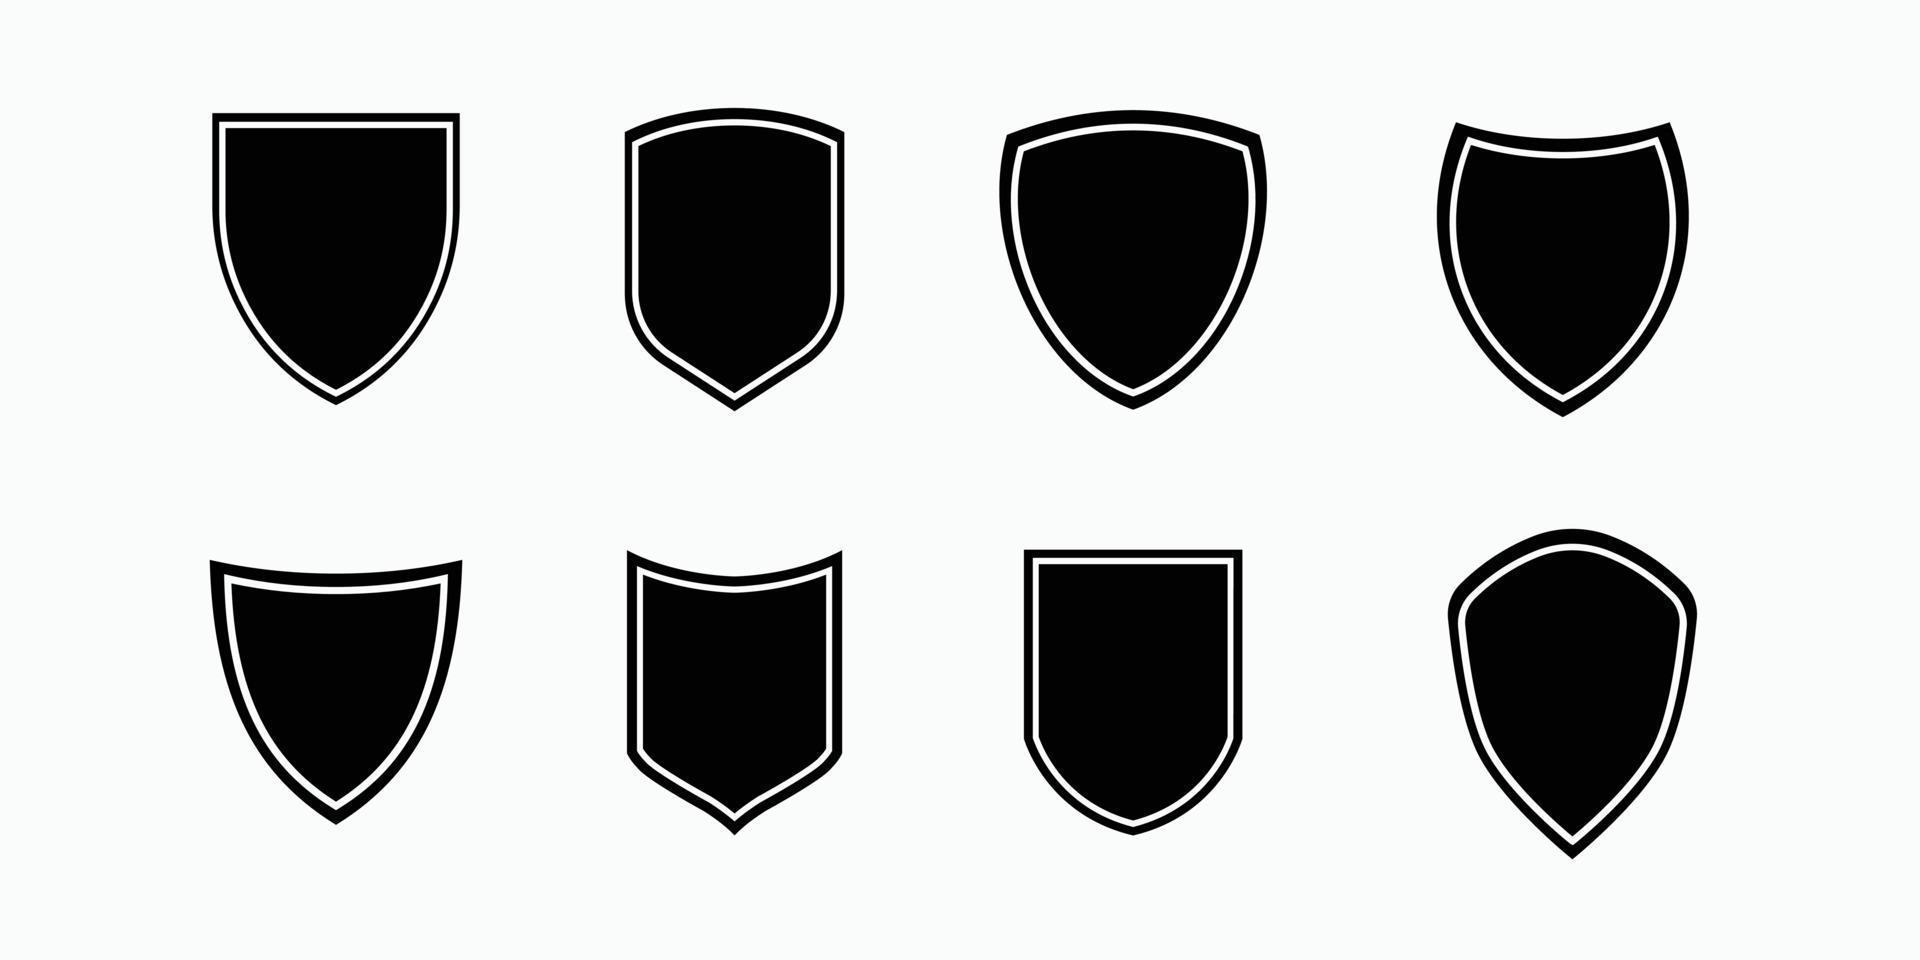 Vector Shield icon, Heraldic shields,  Black Labels, Vintage badges isolate, Protect shapes